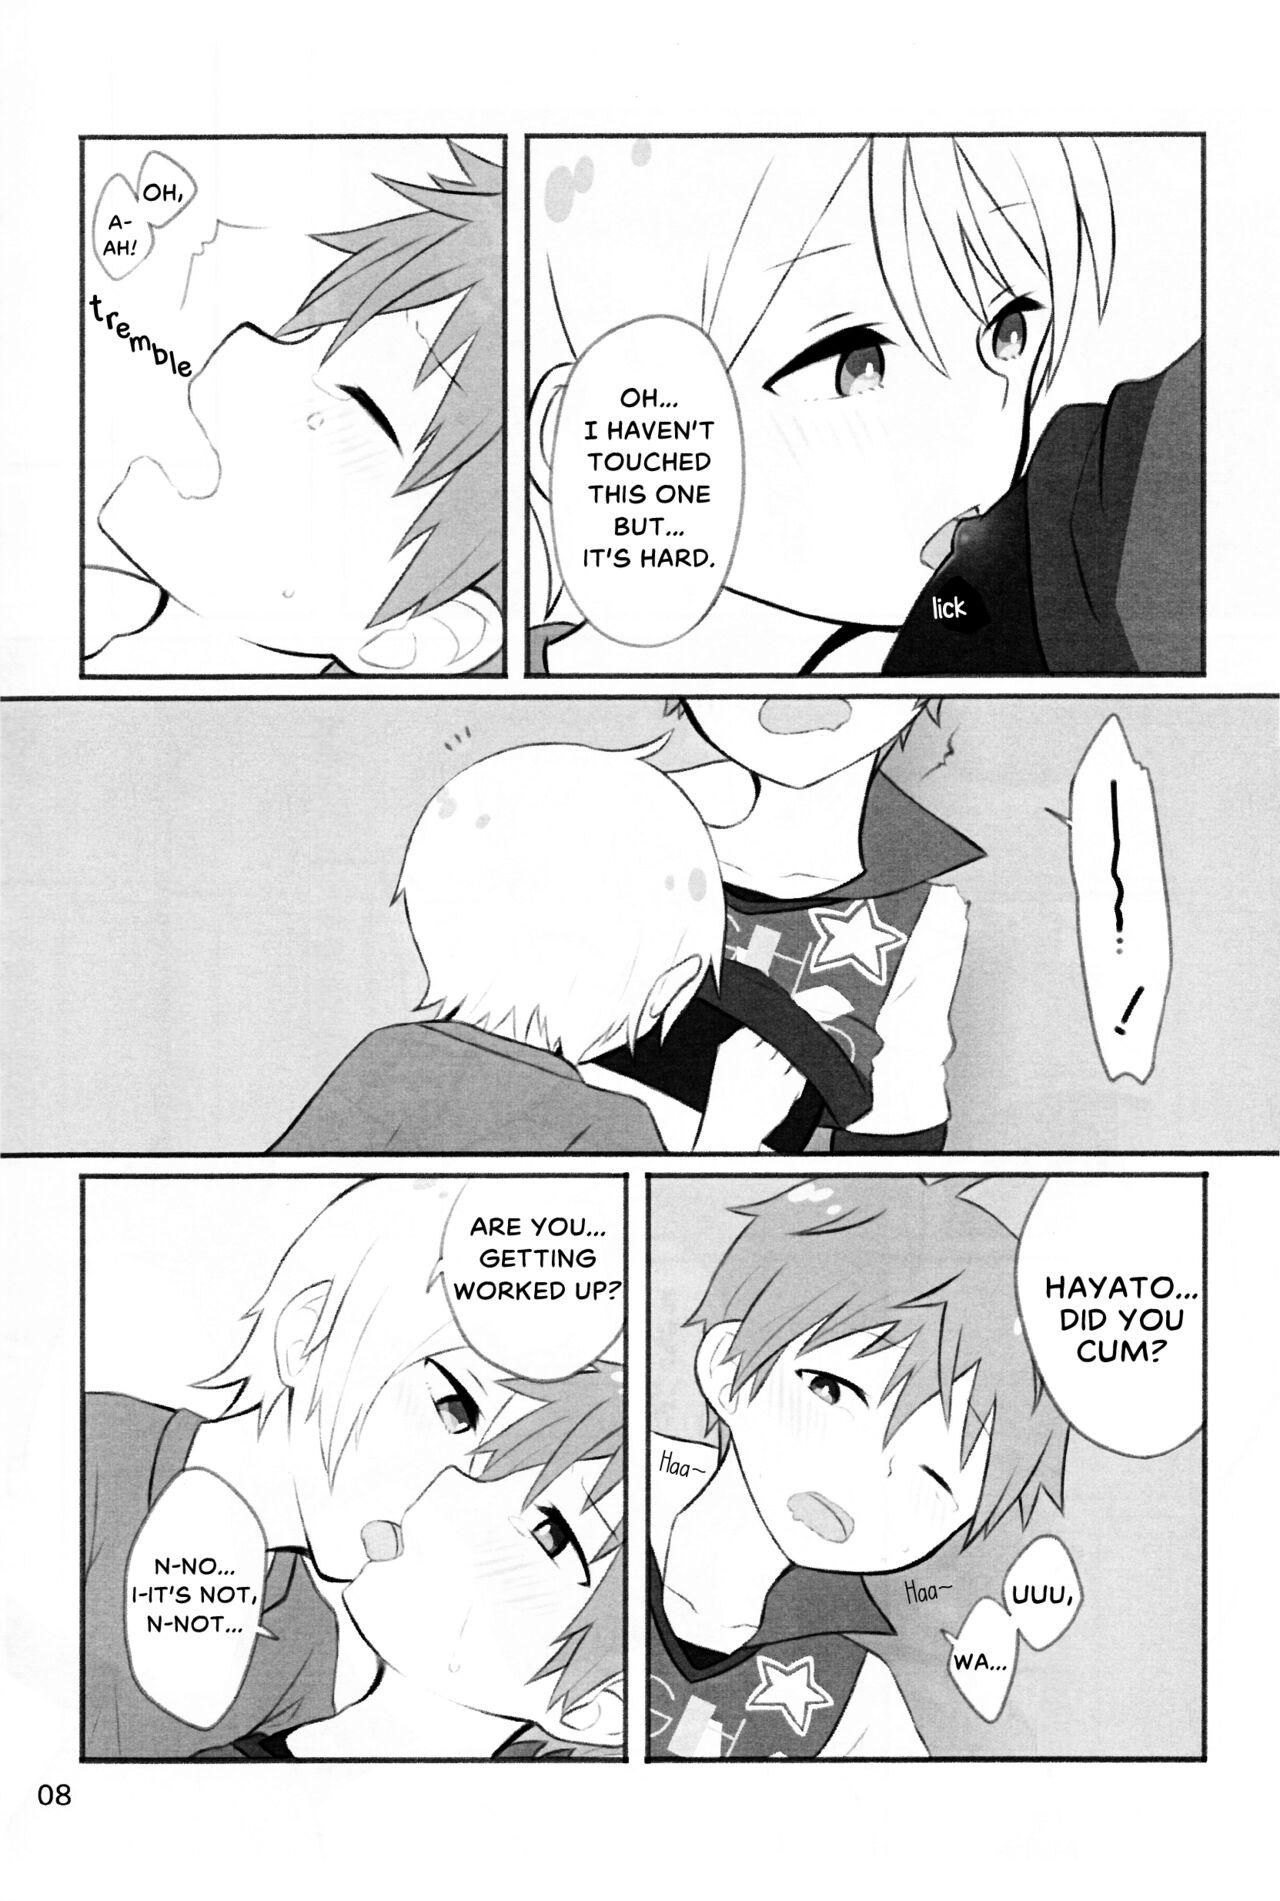 Soapy You Can Do it! You Can Do It Hayatocchi! - The idolmaster sidem Gay Military - Page 7